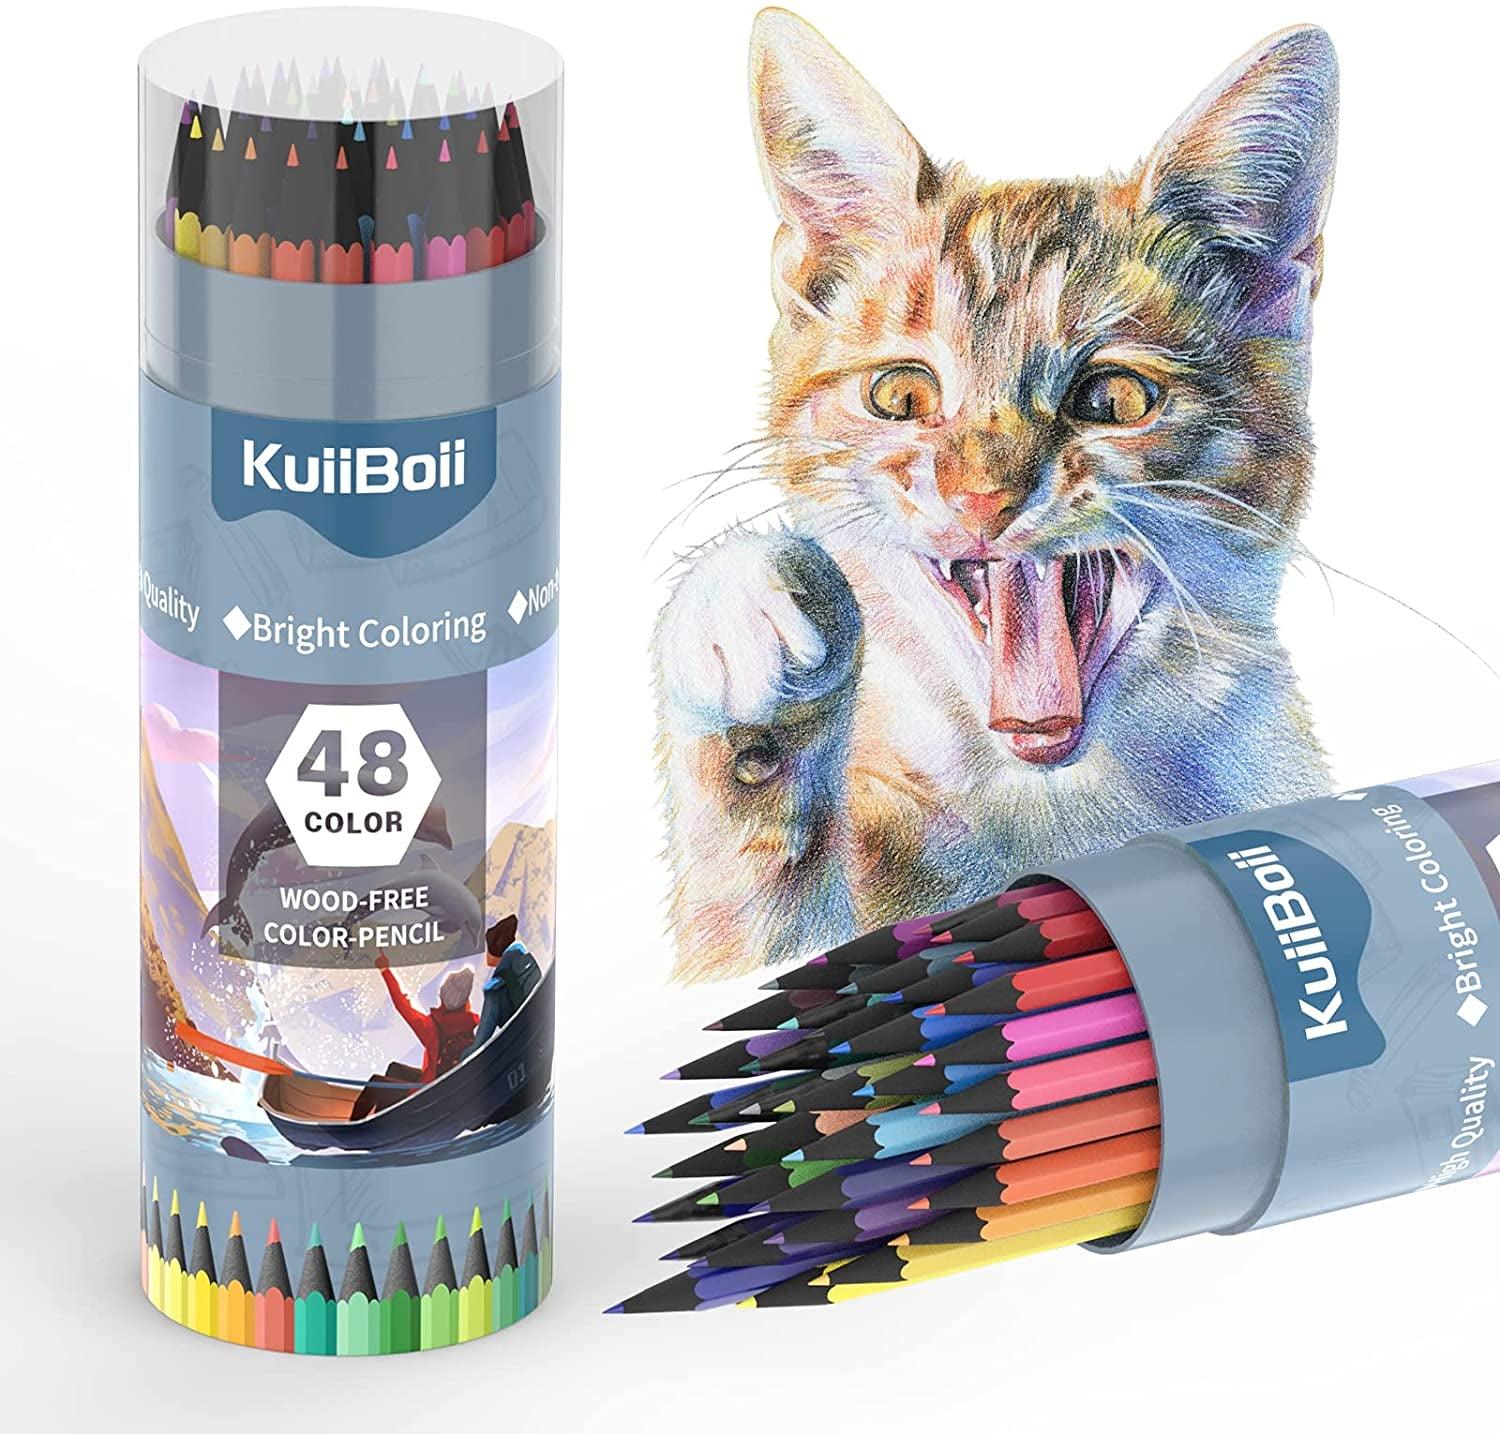 Wilshin Colored Pencils 48 Count Artist Quality-Coloring Book Colored Pencil Set for Adults and Children